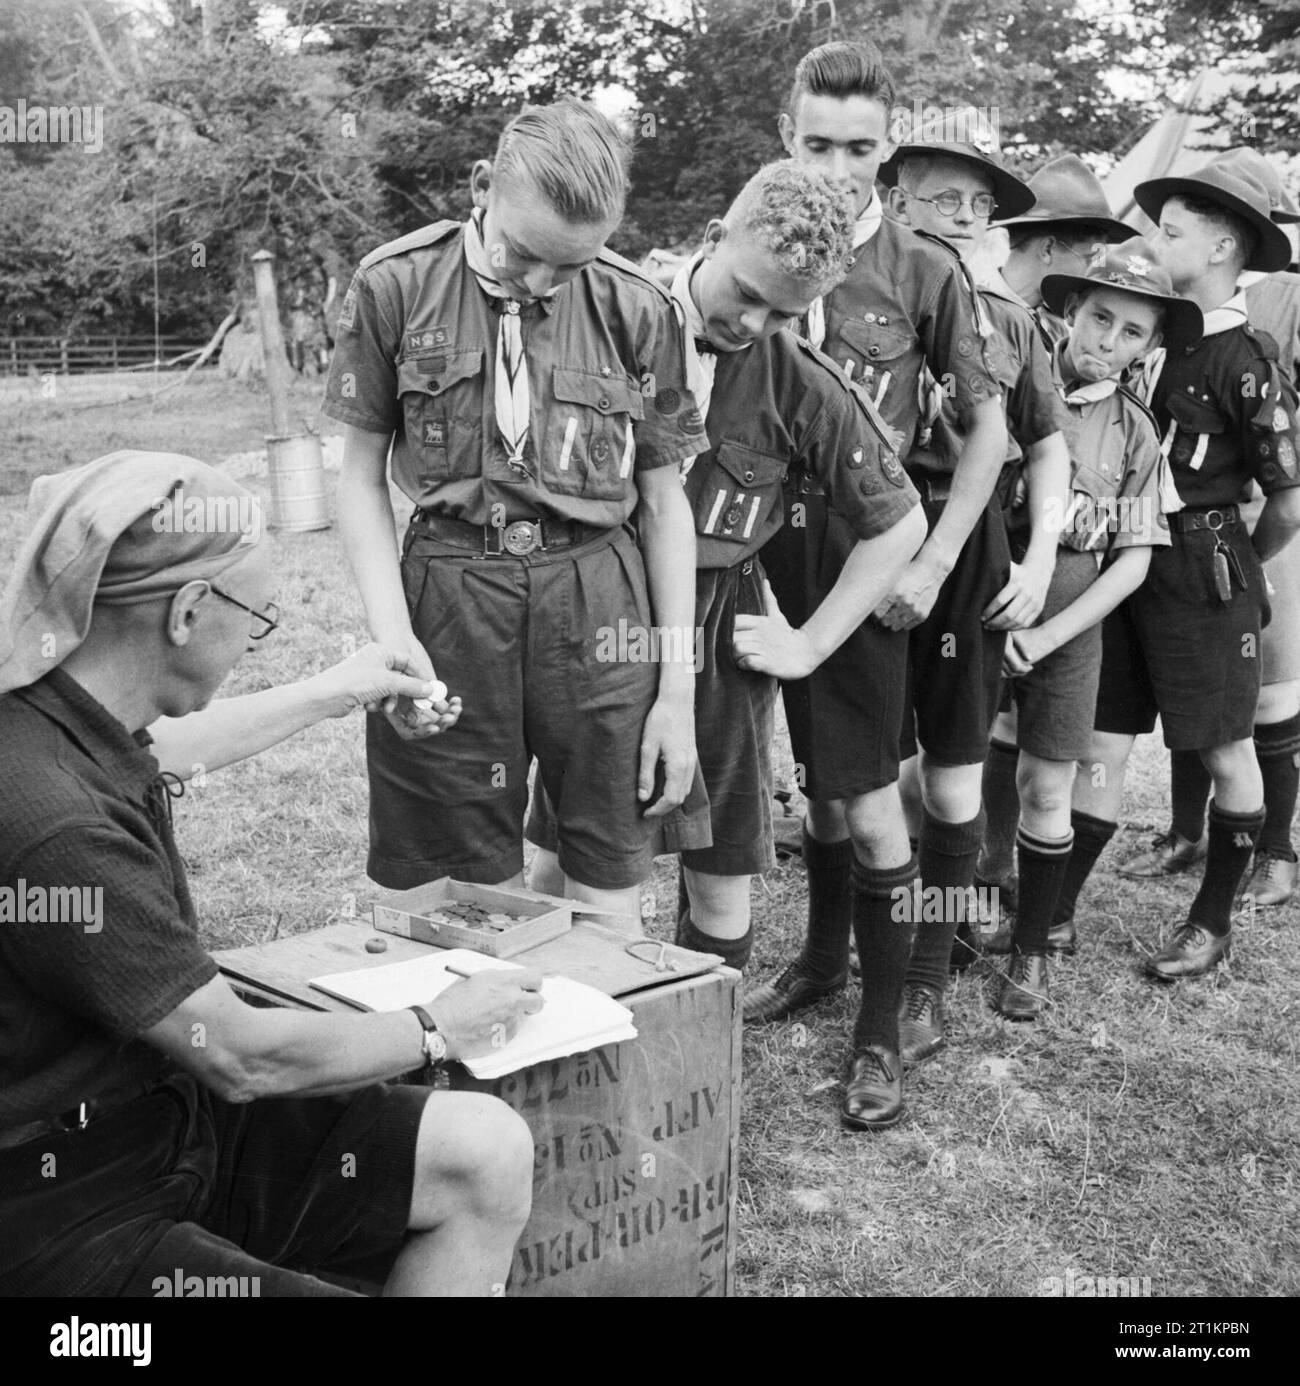 Pay Day for Boy Scouts at a fruit-picking camp near Cambridge in 1943. Saturday is Pay Day at the fruit-picking camp. Boy Scouts queue up in a pay parade to collect their pocket money from the Scout master. Over 14s get half a crown, whilst under 14s receive a shilling. Stock Photo